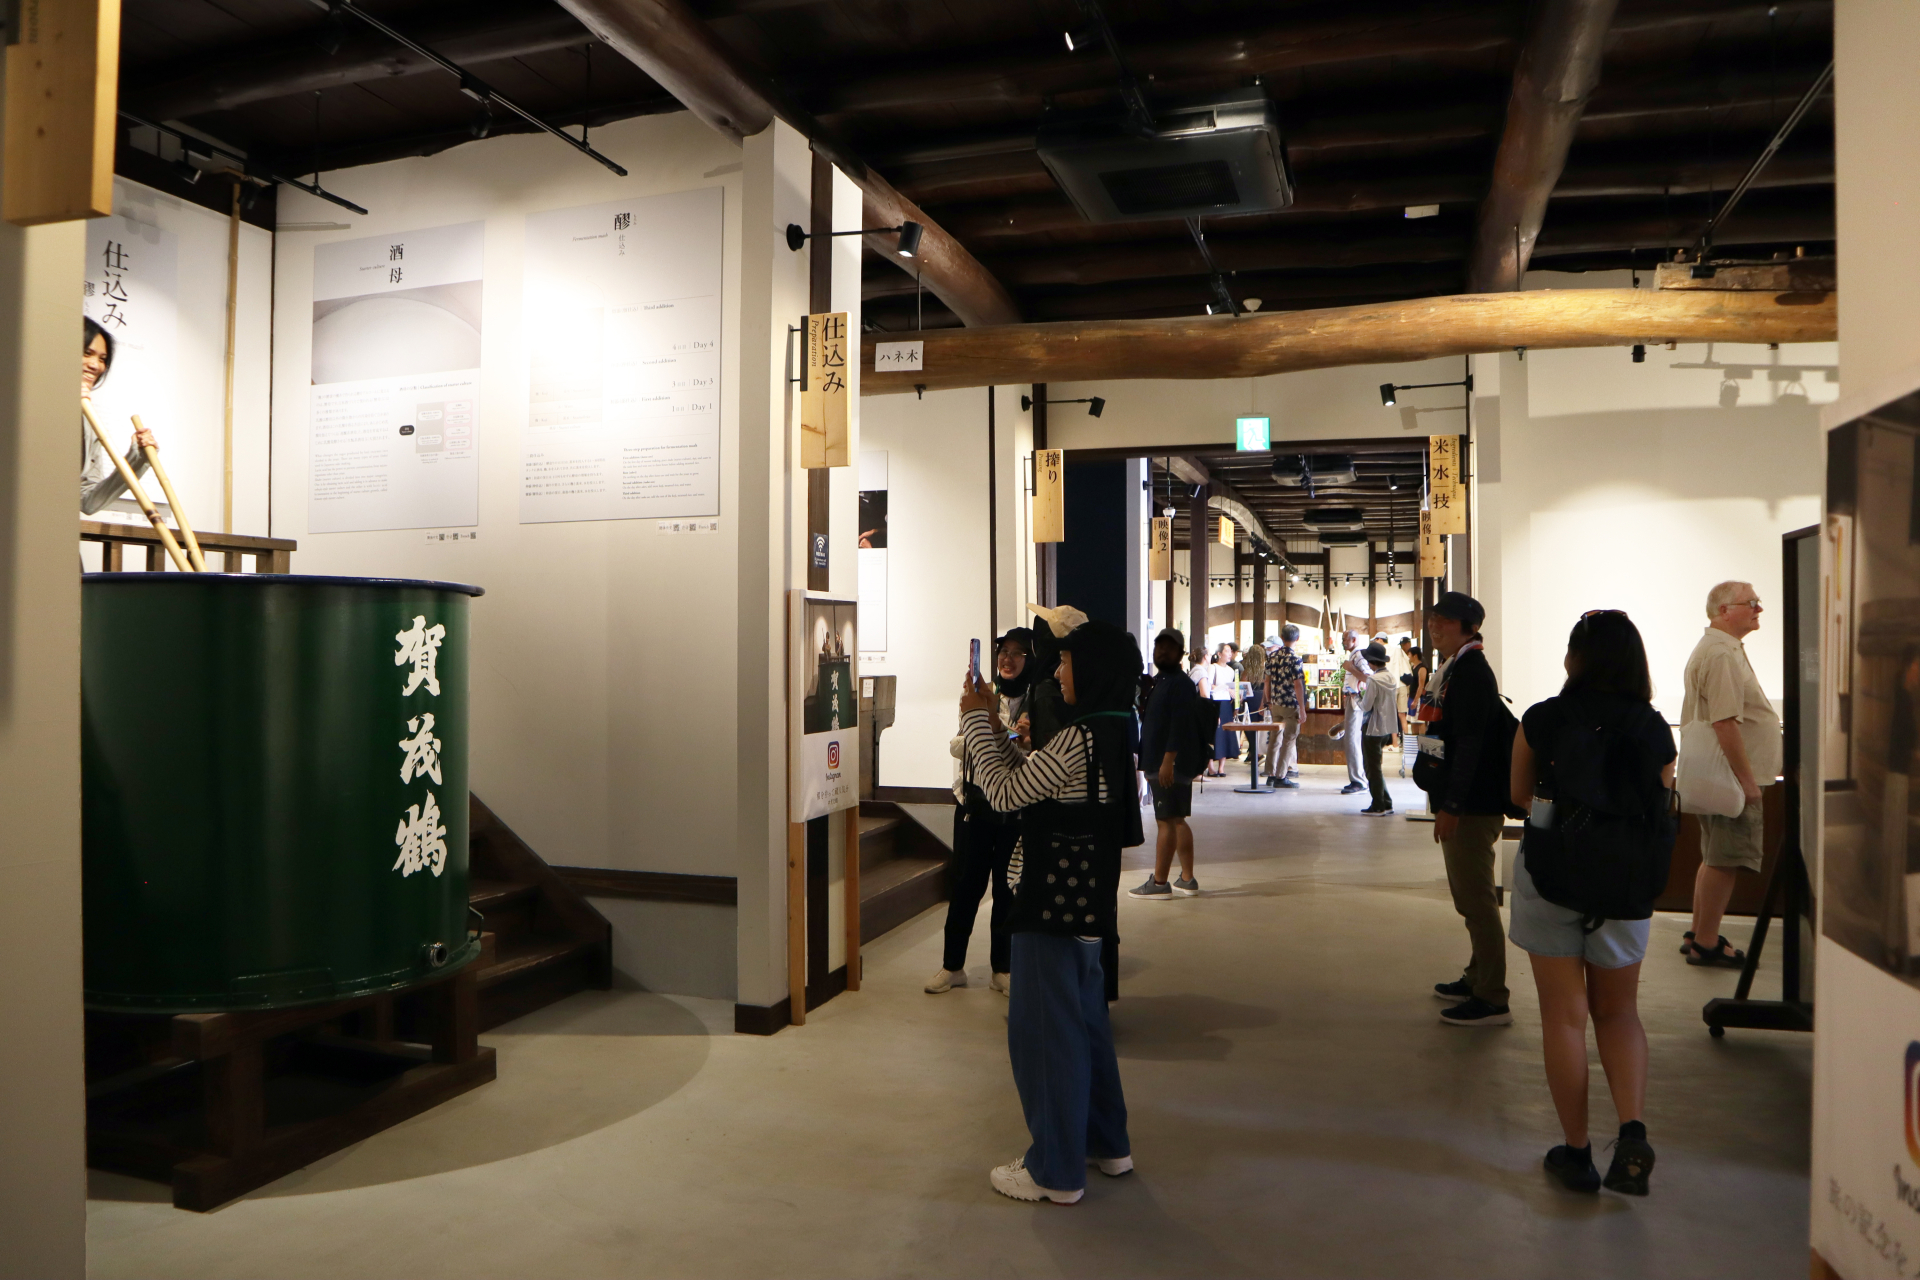 A field visit at the one of the sake brewery warehouses.